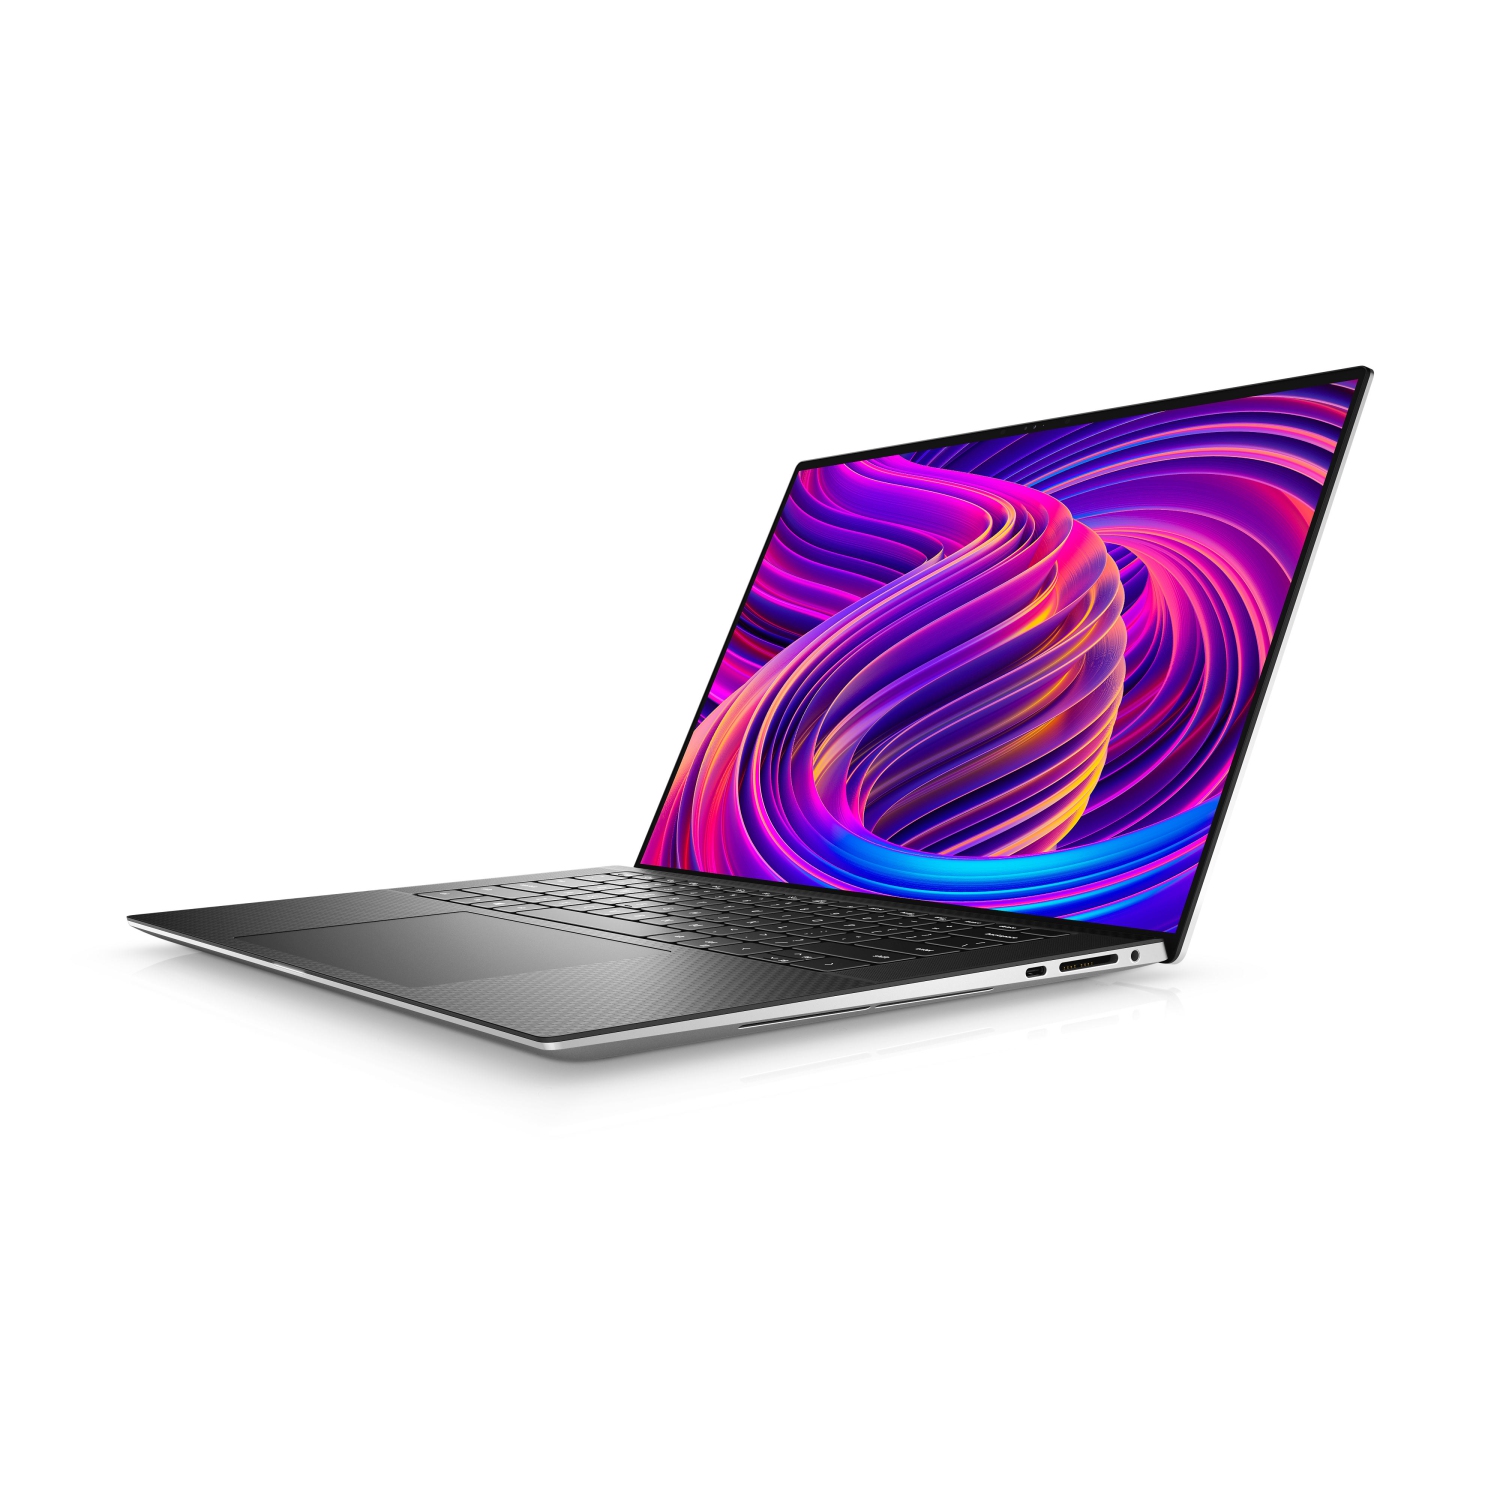 Refurbished (Excellent) - Dell XPS 15 9510 Laptop (2021), 15.6" 4K Touch, Core i7 - 1TB SSD - 32GB RAM - 3050 Ti, 8 Cores @ 4.6 GHz - 11th Gen CPU Certified Refurbished